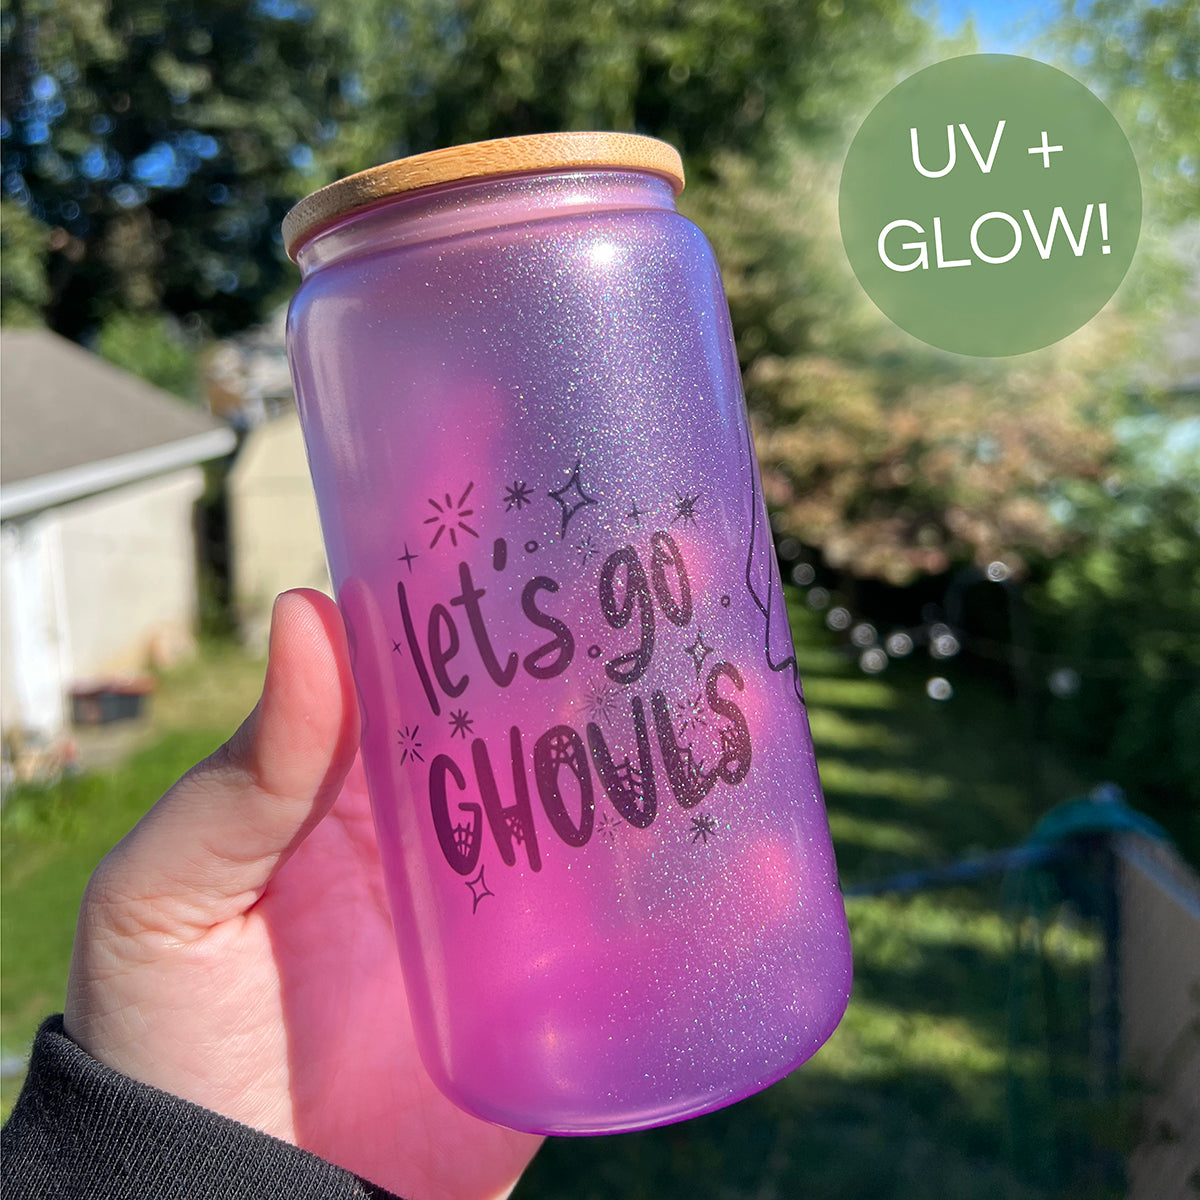 Let's Go Ghouls 16 oz Glass Jar With Lid